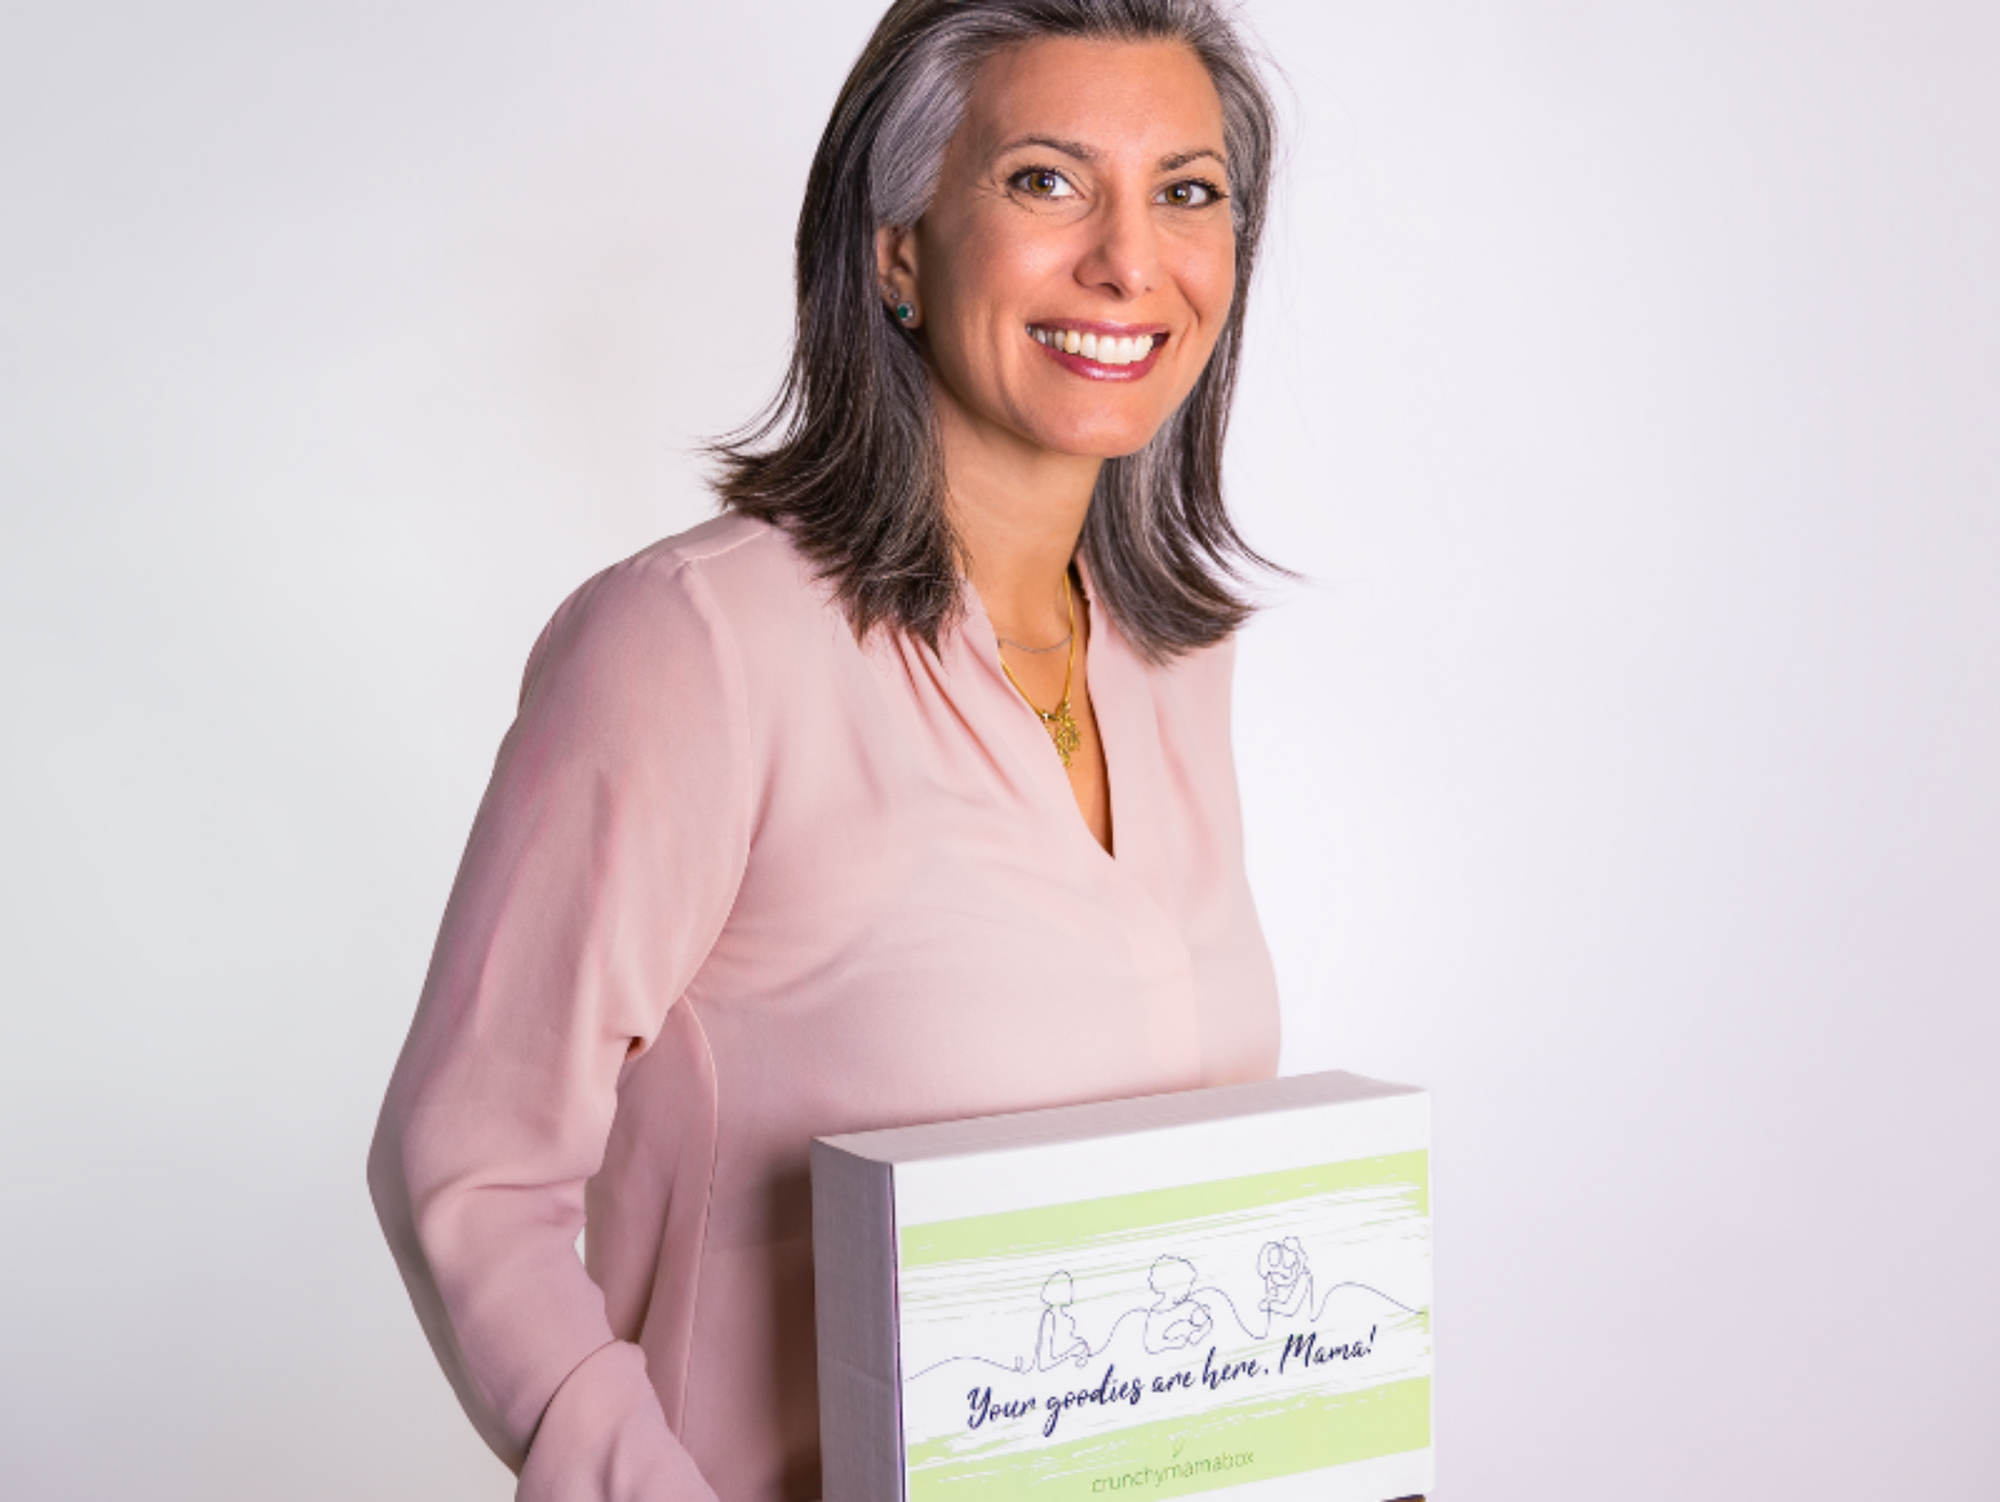 Unveiling the Crunchy Mama Box: A Pioneering Journey into Wellness and Sustainability - An Exclusive LA Wire Interview